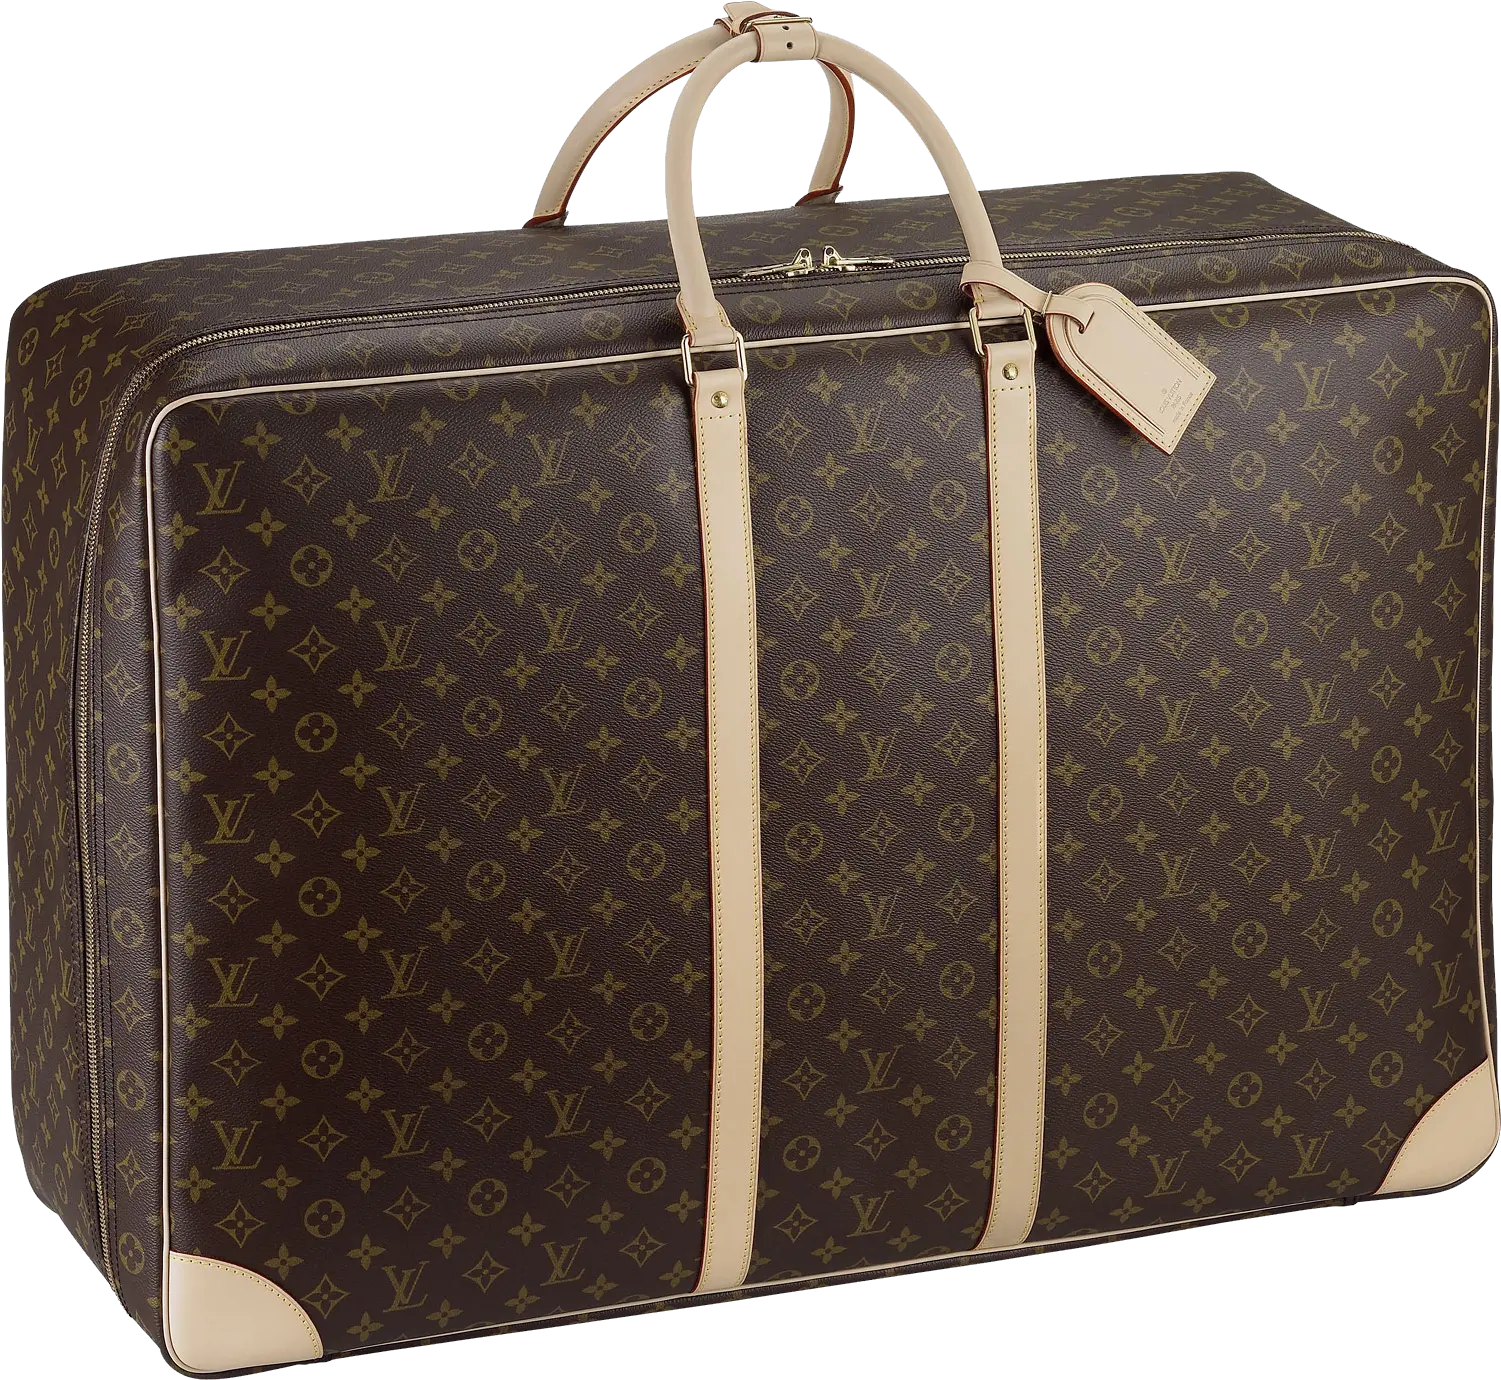 Suitcase Png Image For Free Download Louis Vuitton Suitcase Png Luggage Png